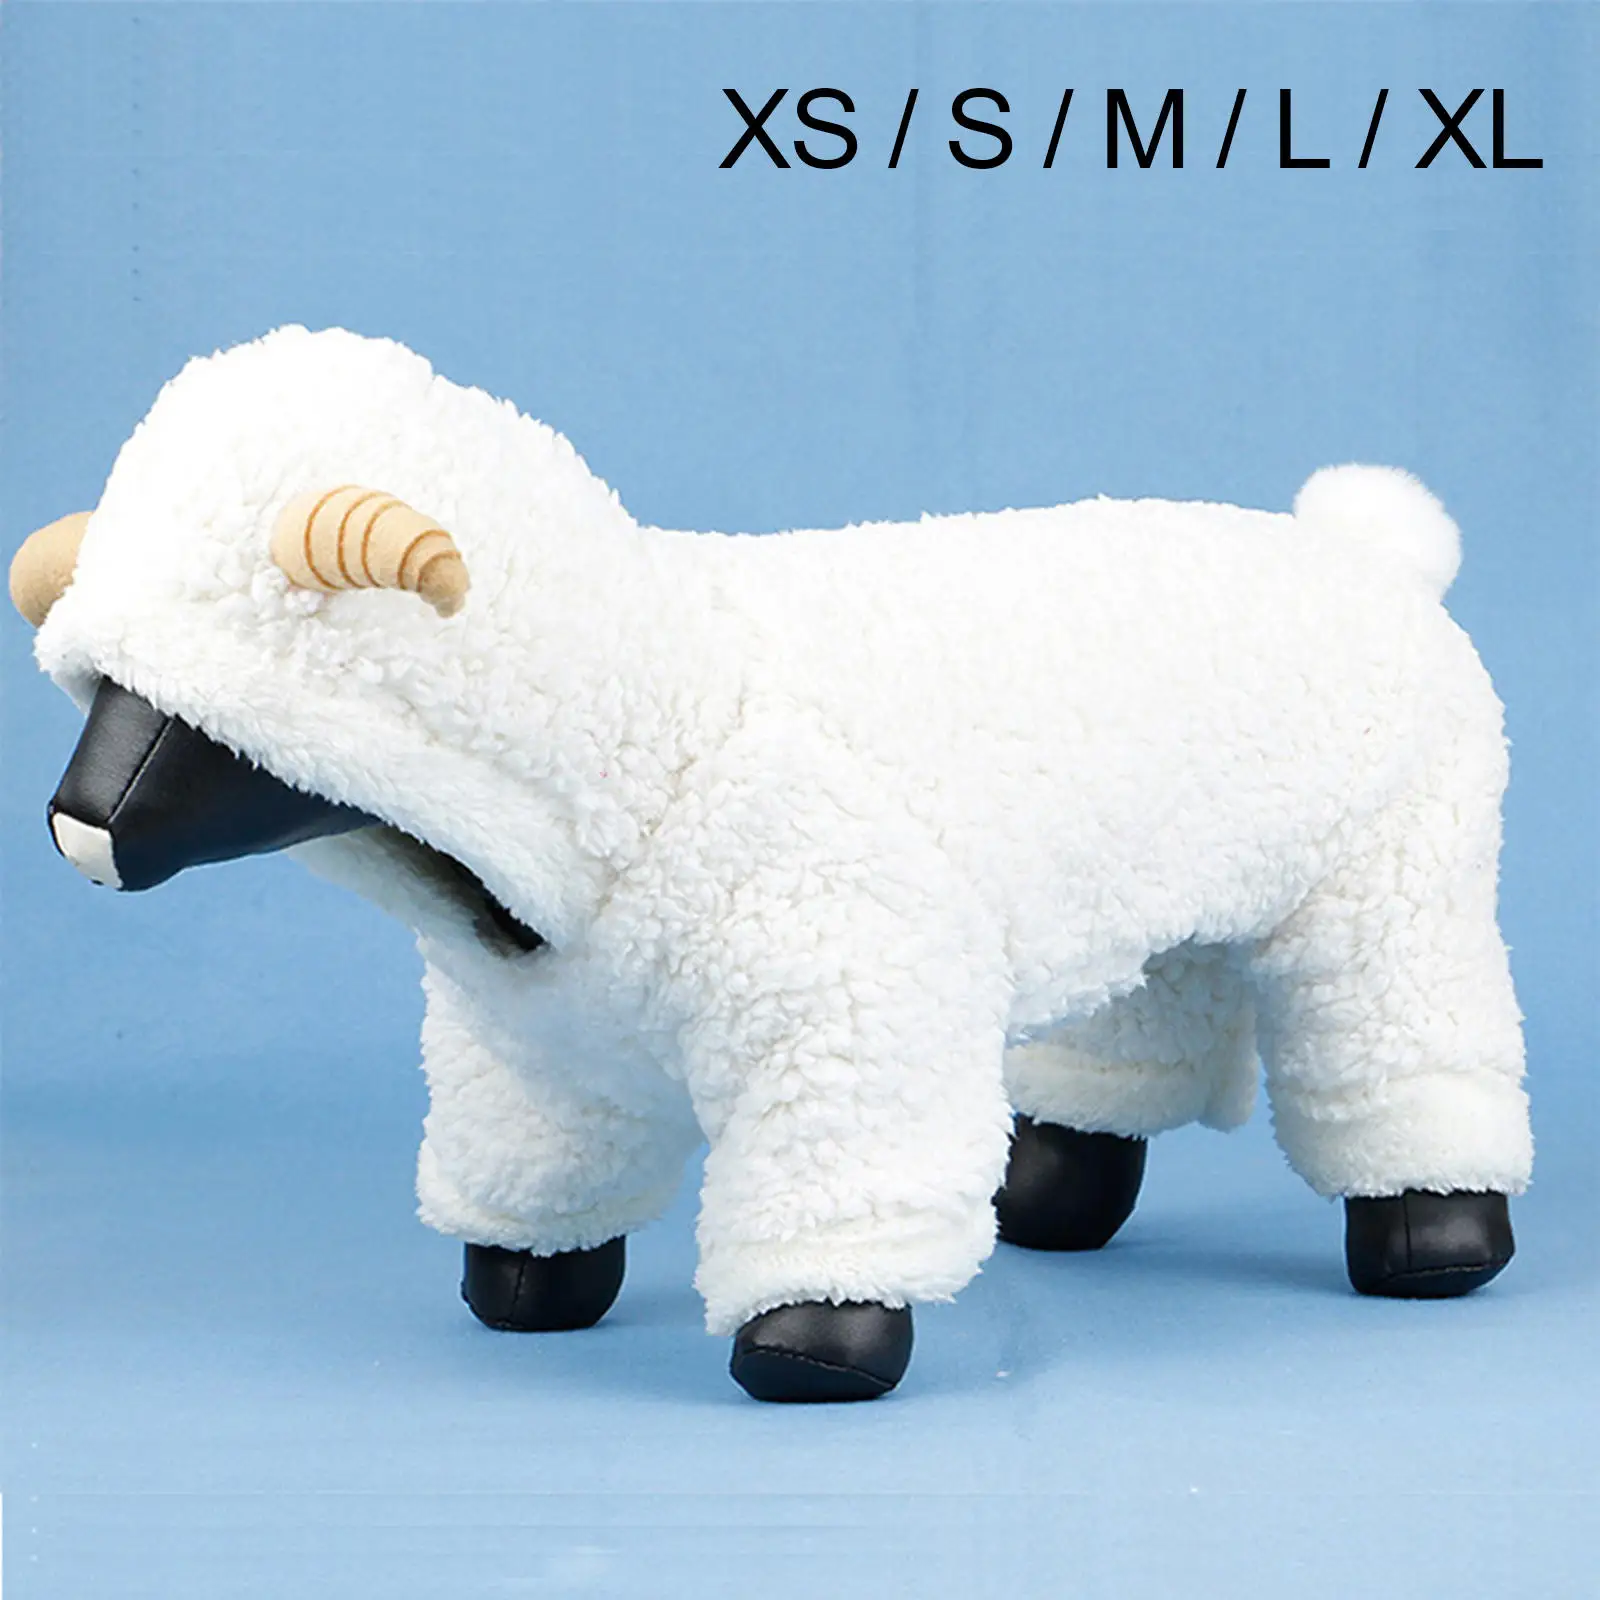 Creative Dog Clothes Funny Party Hoodie Warm Sheep Costume Outfits for Christmas Holiday Cosplay Party Accessories